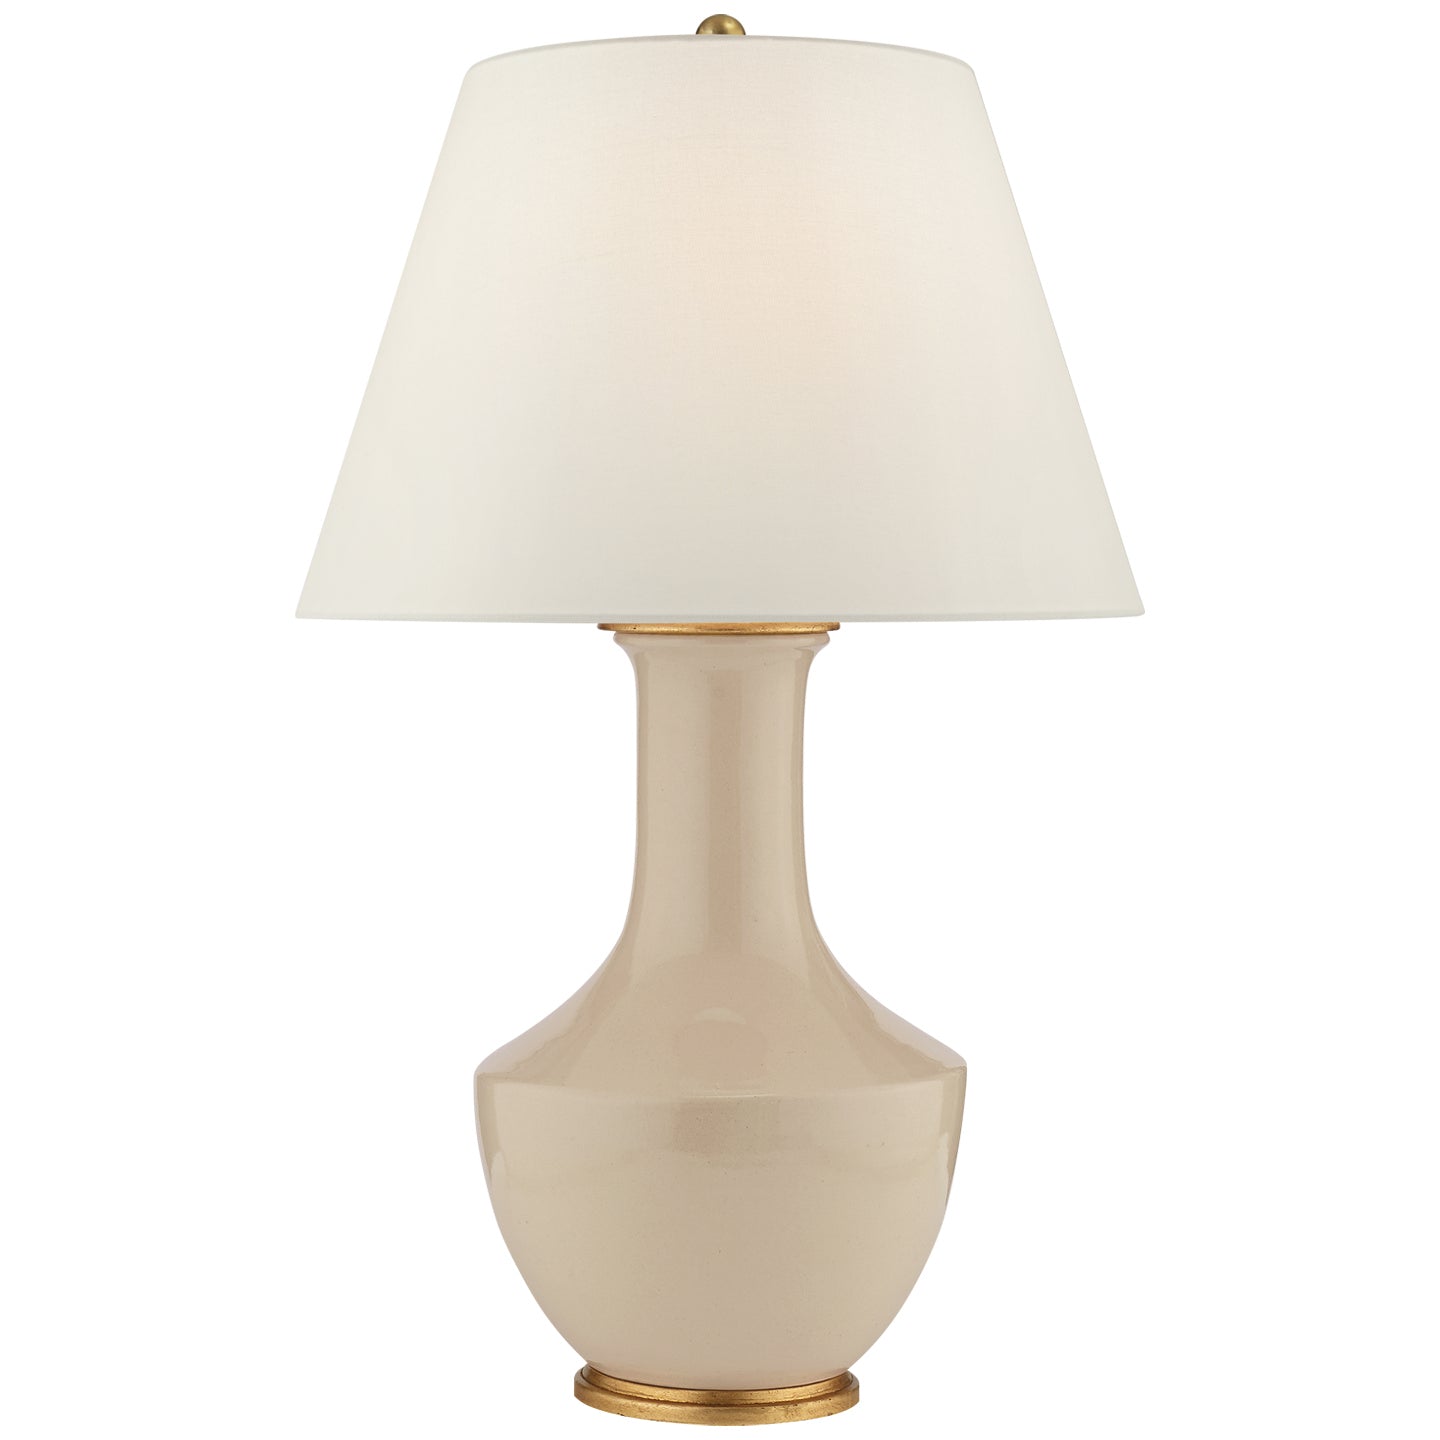 Load image into Gallery viewer, Visual Comfort Signature - CHA 8661ICO-L - One Light Table Lamp - Lambay - Coconut Porcelain
